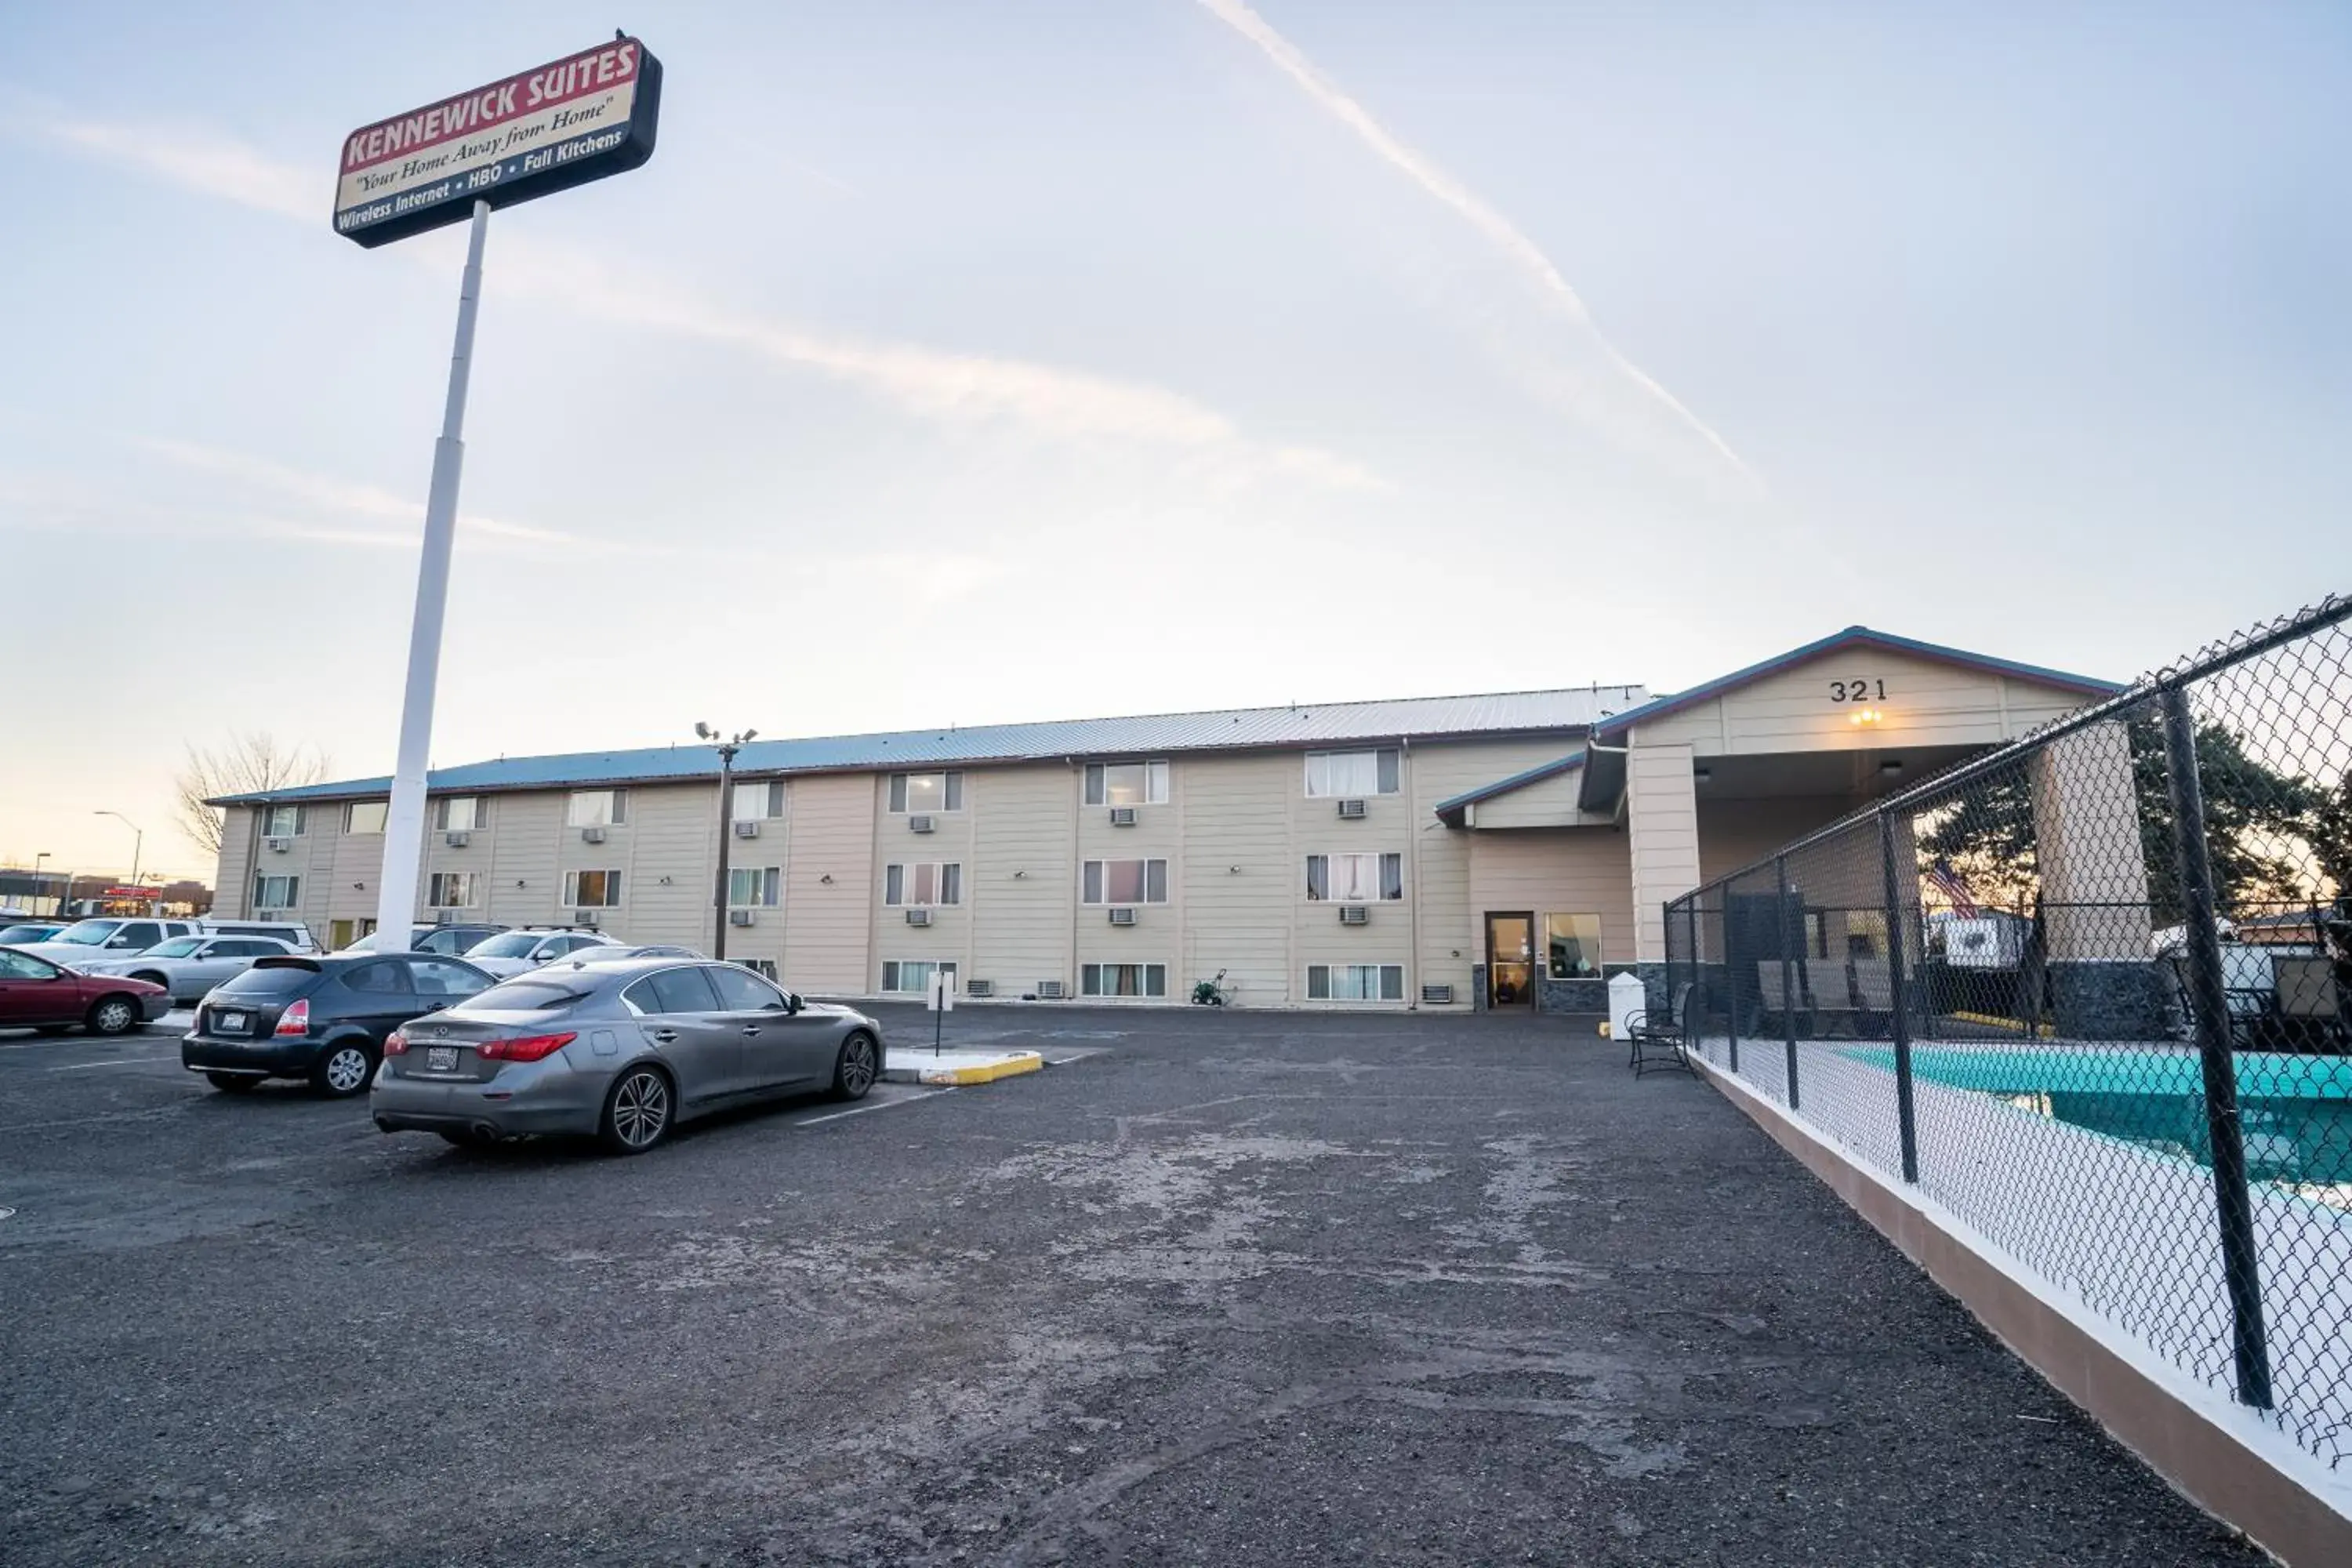 Property Building in Kennewick Suites